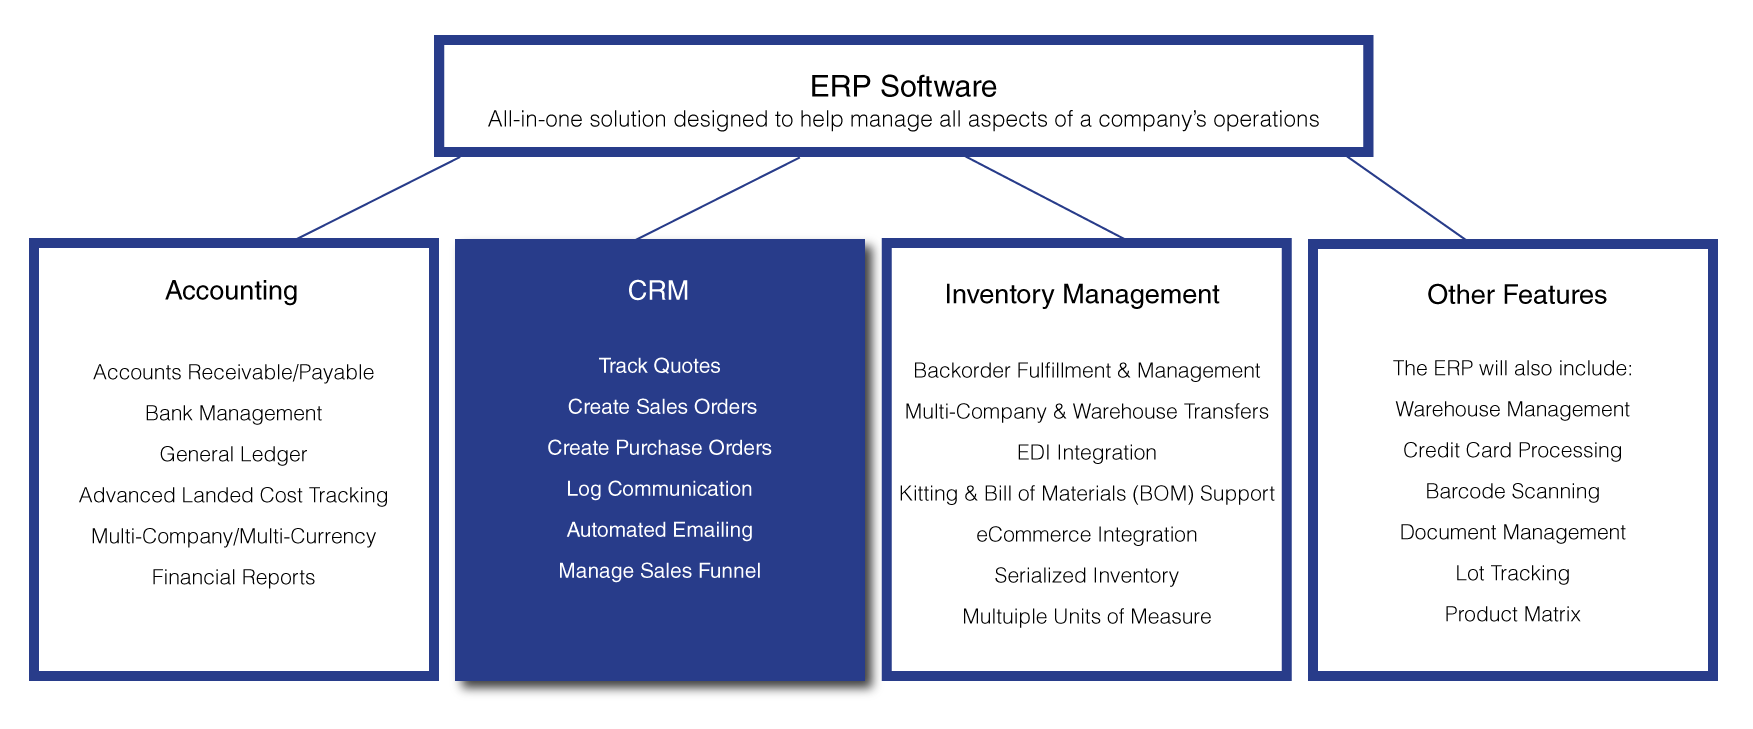 CRM and ERP Features listed in chart